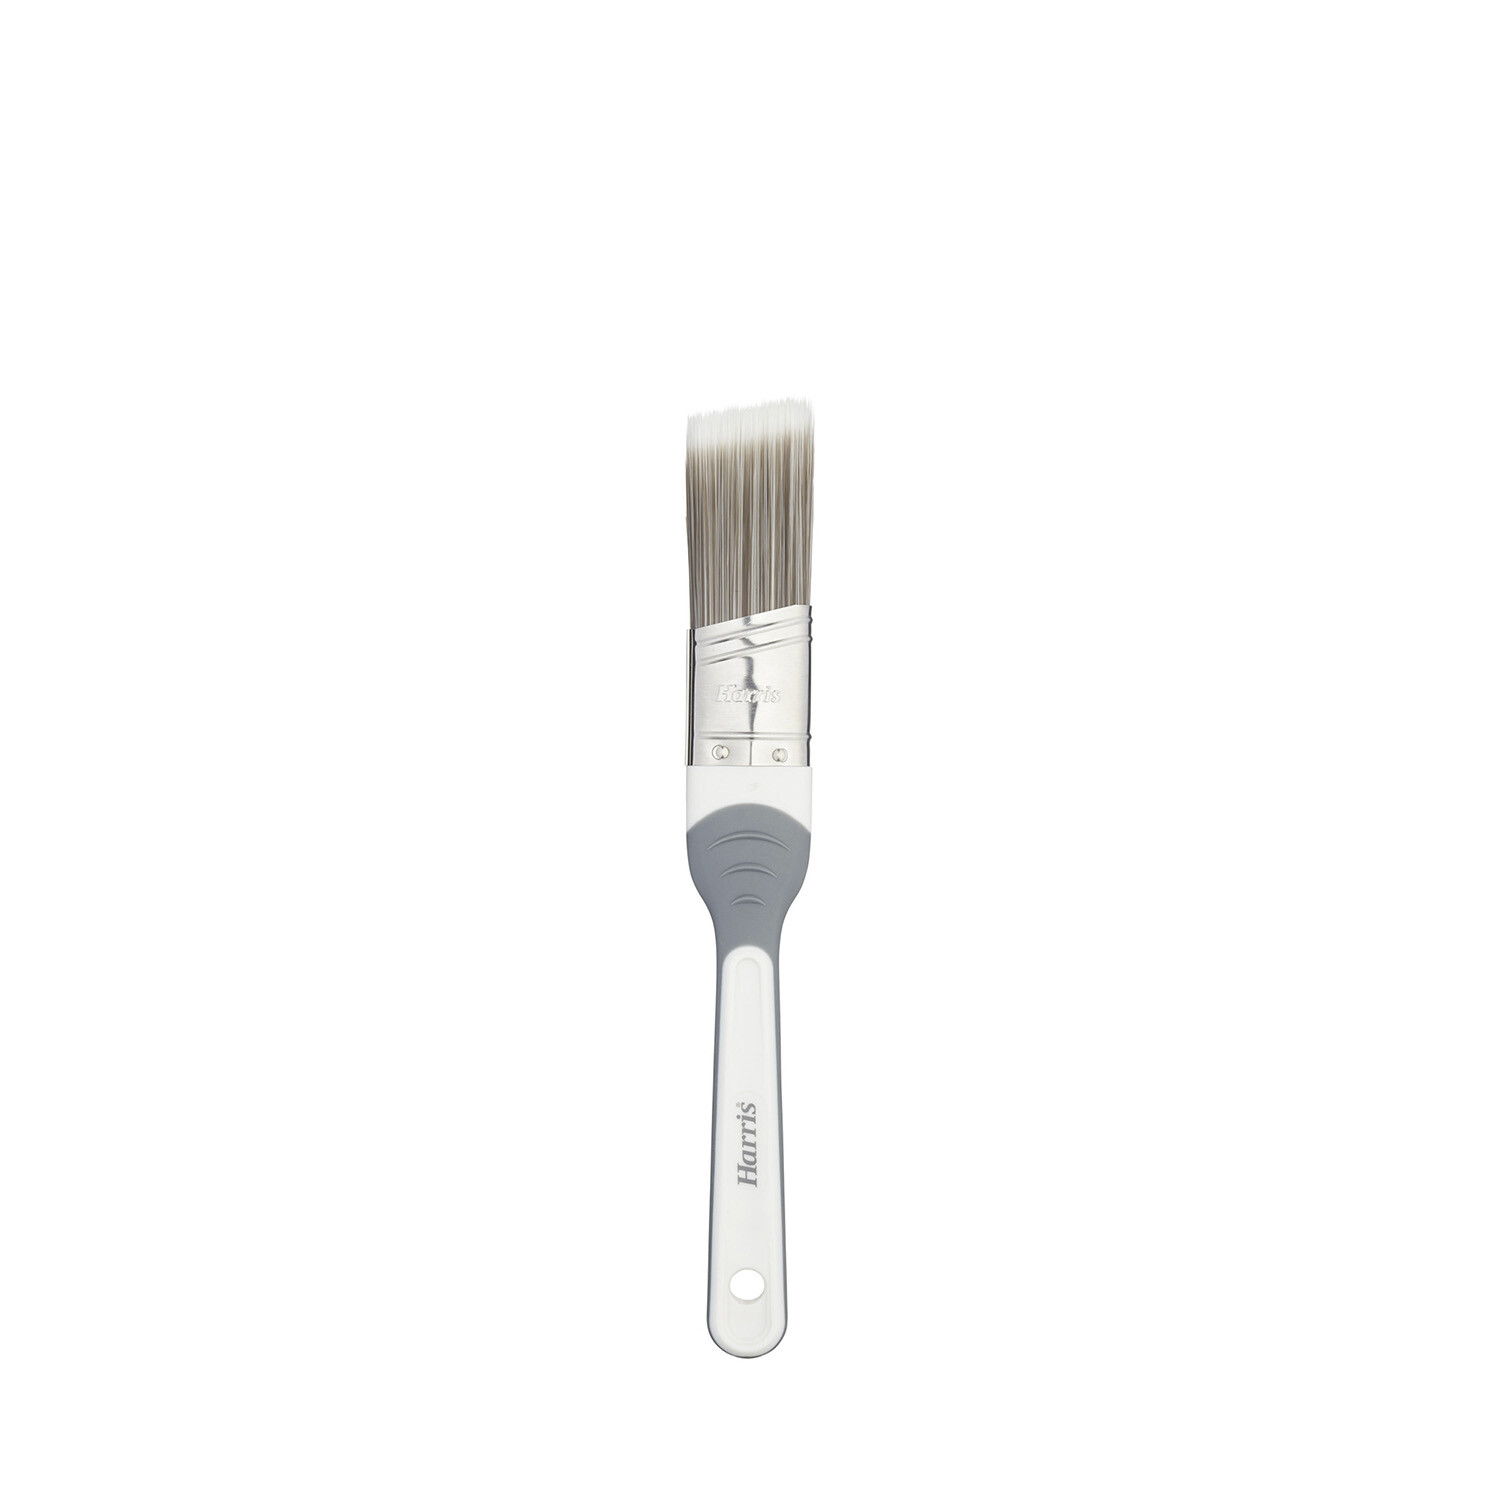 Harris 1 inch Seriously Good Walls and Ceilings Angled Brush Image 3